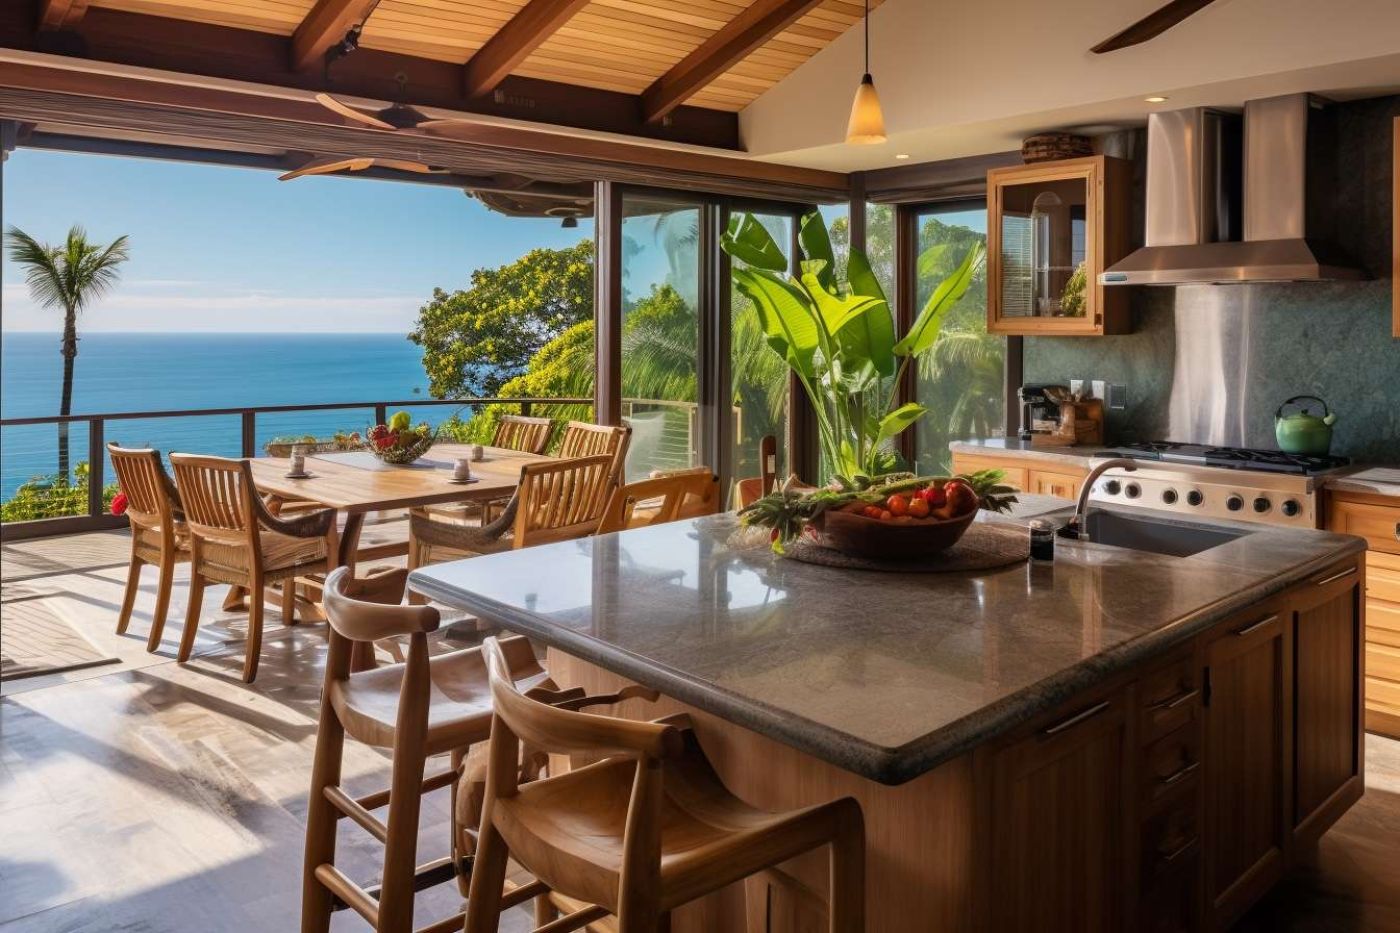 Renovating For Resale: Boosting Your Home's Value In Hawaii